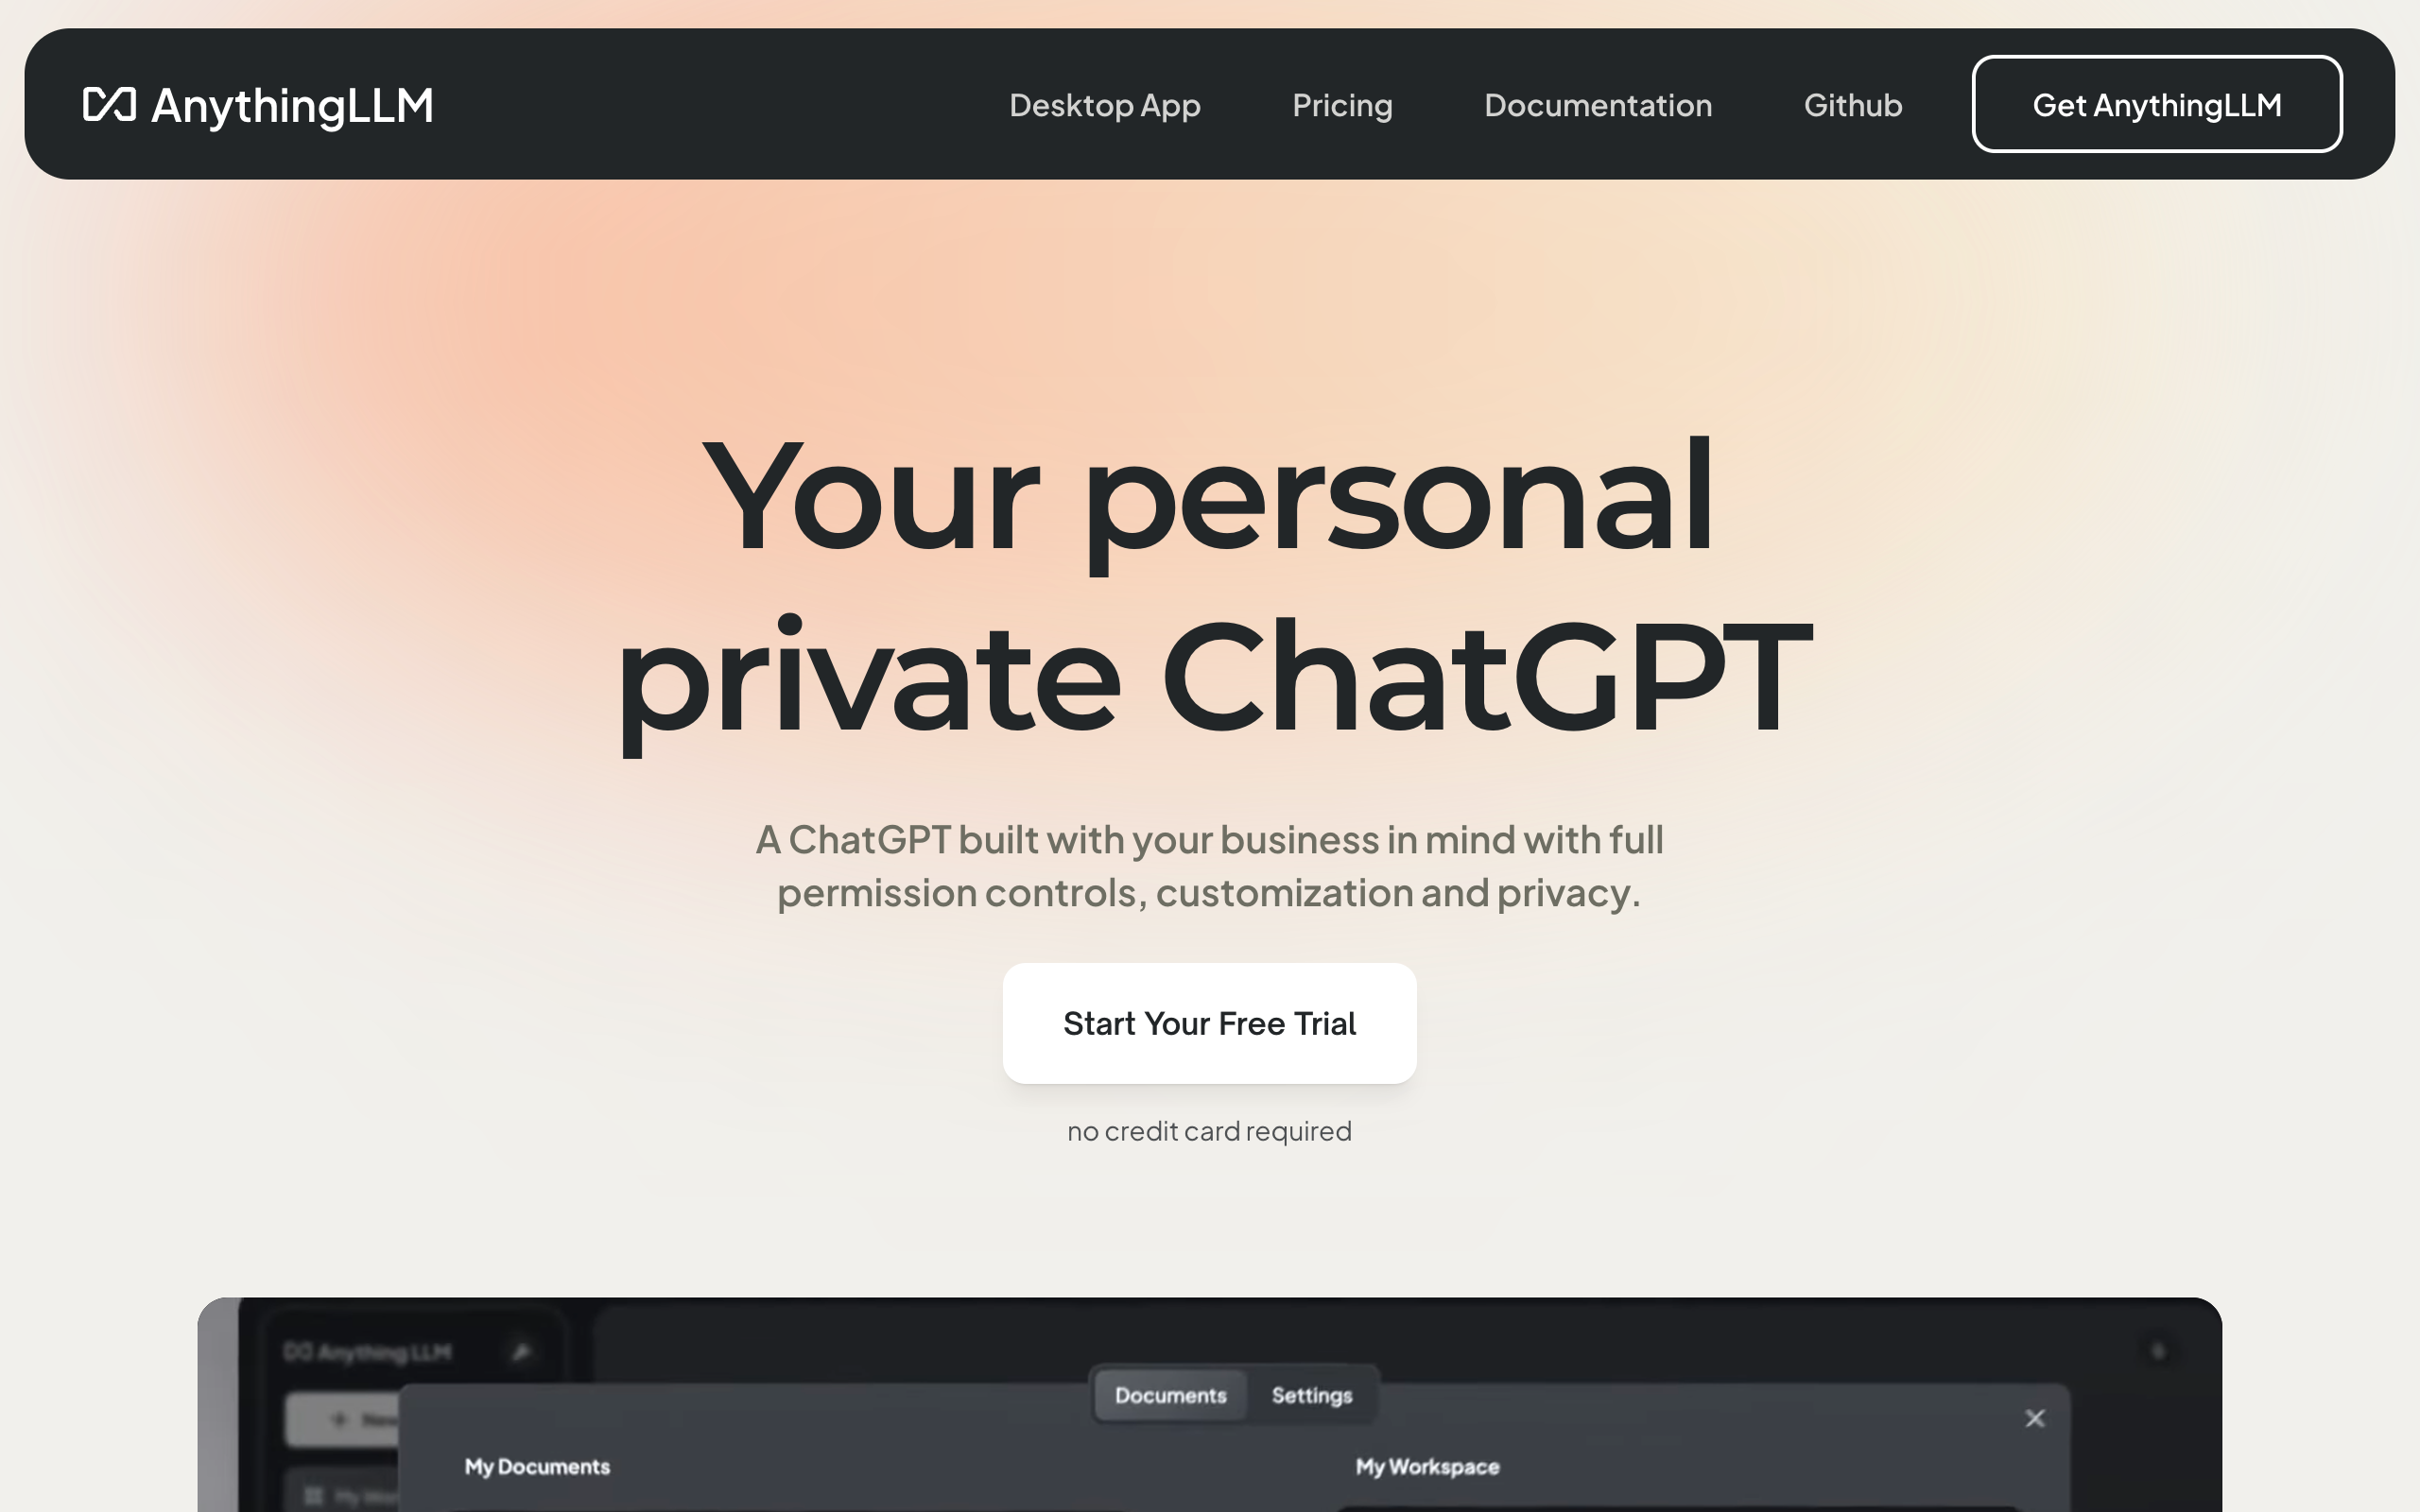 A ChatGPT built with your business in mind with full permission controls, customization and privacy.